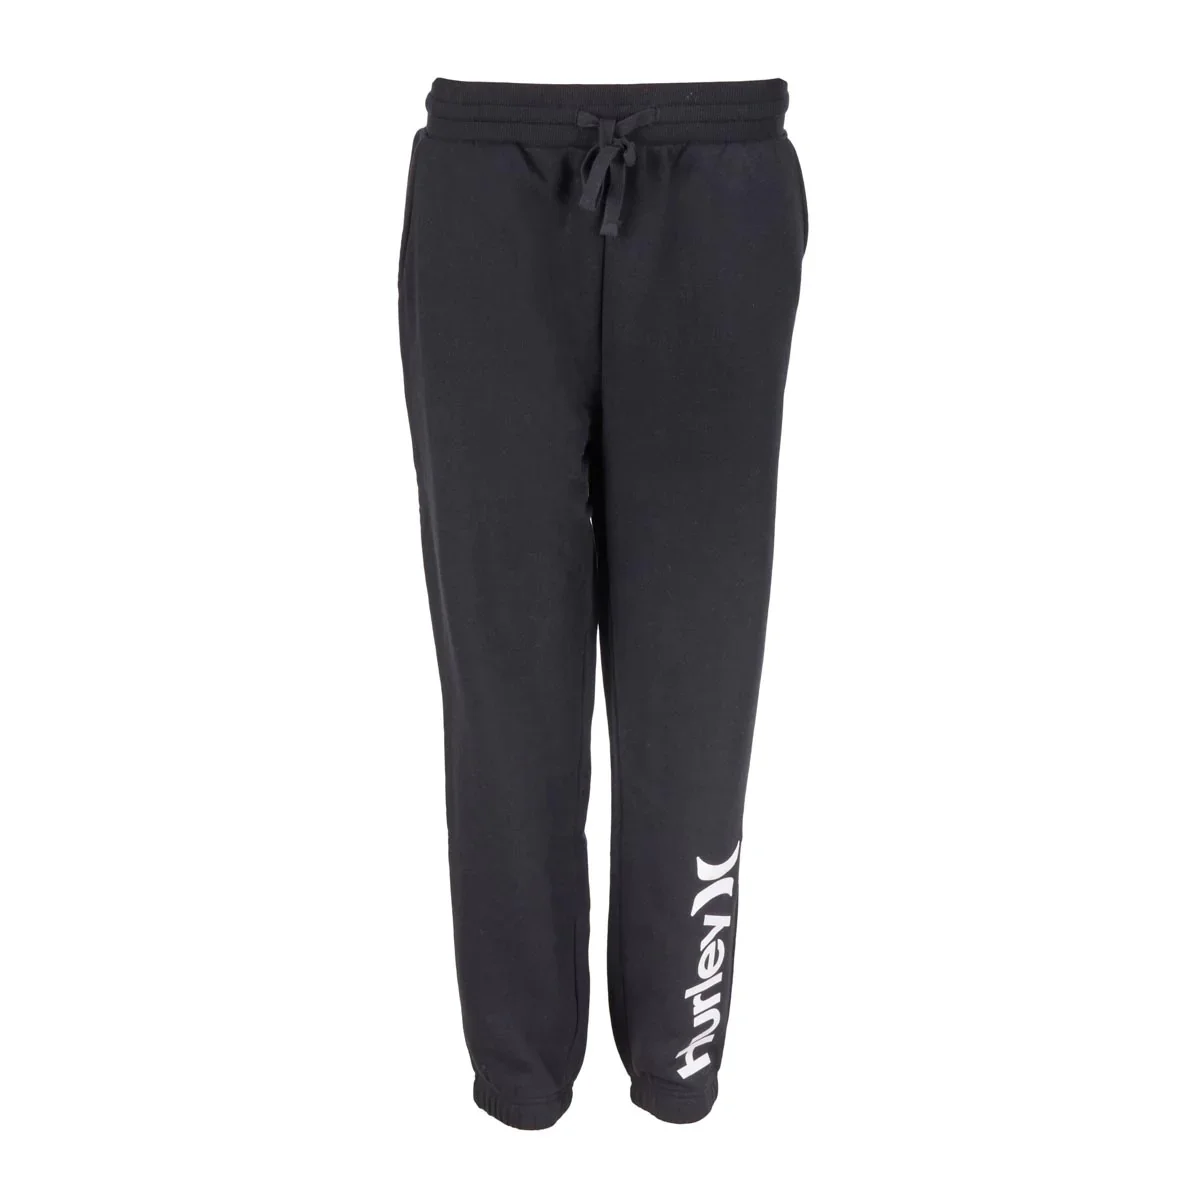 Image of Hurley Women's Jogger